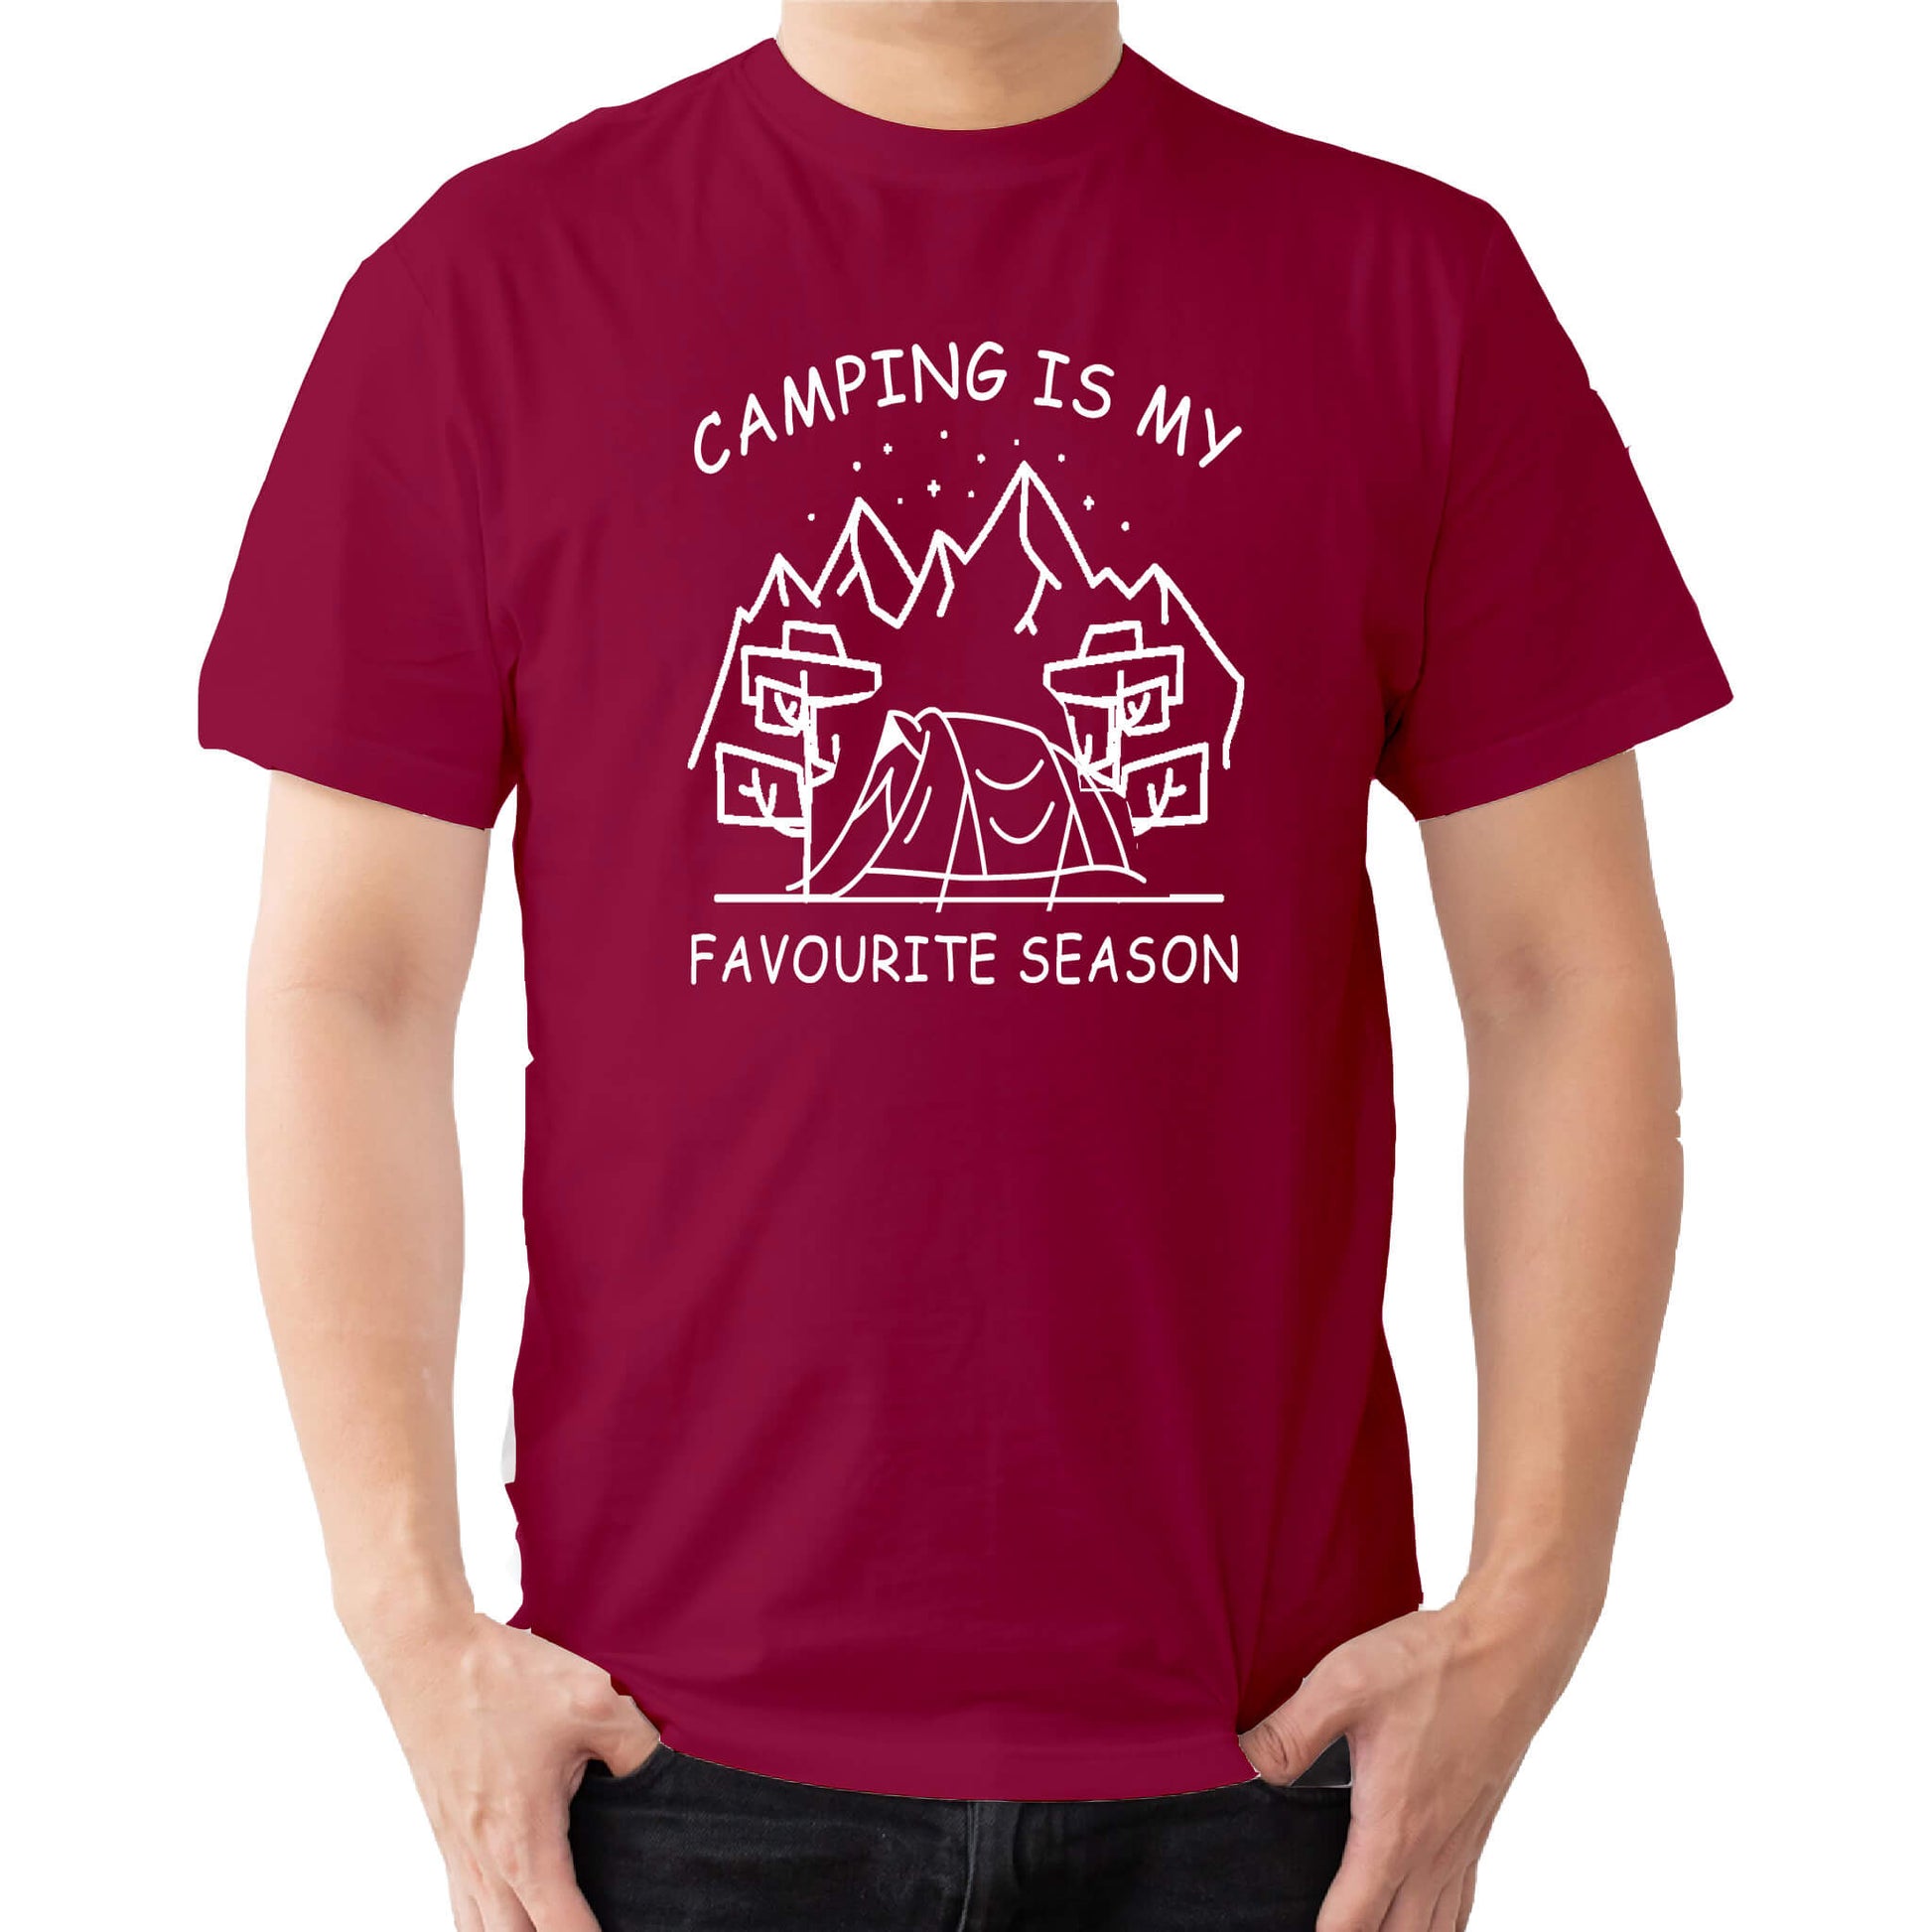  "Red Graphic tee with an illustration of a tent, surrounded by nature. Text reads: 'Camping is my favorite season.' Celebrate the great outdoors!"